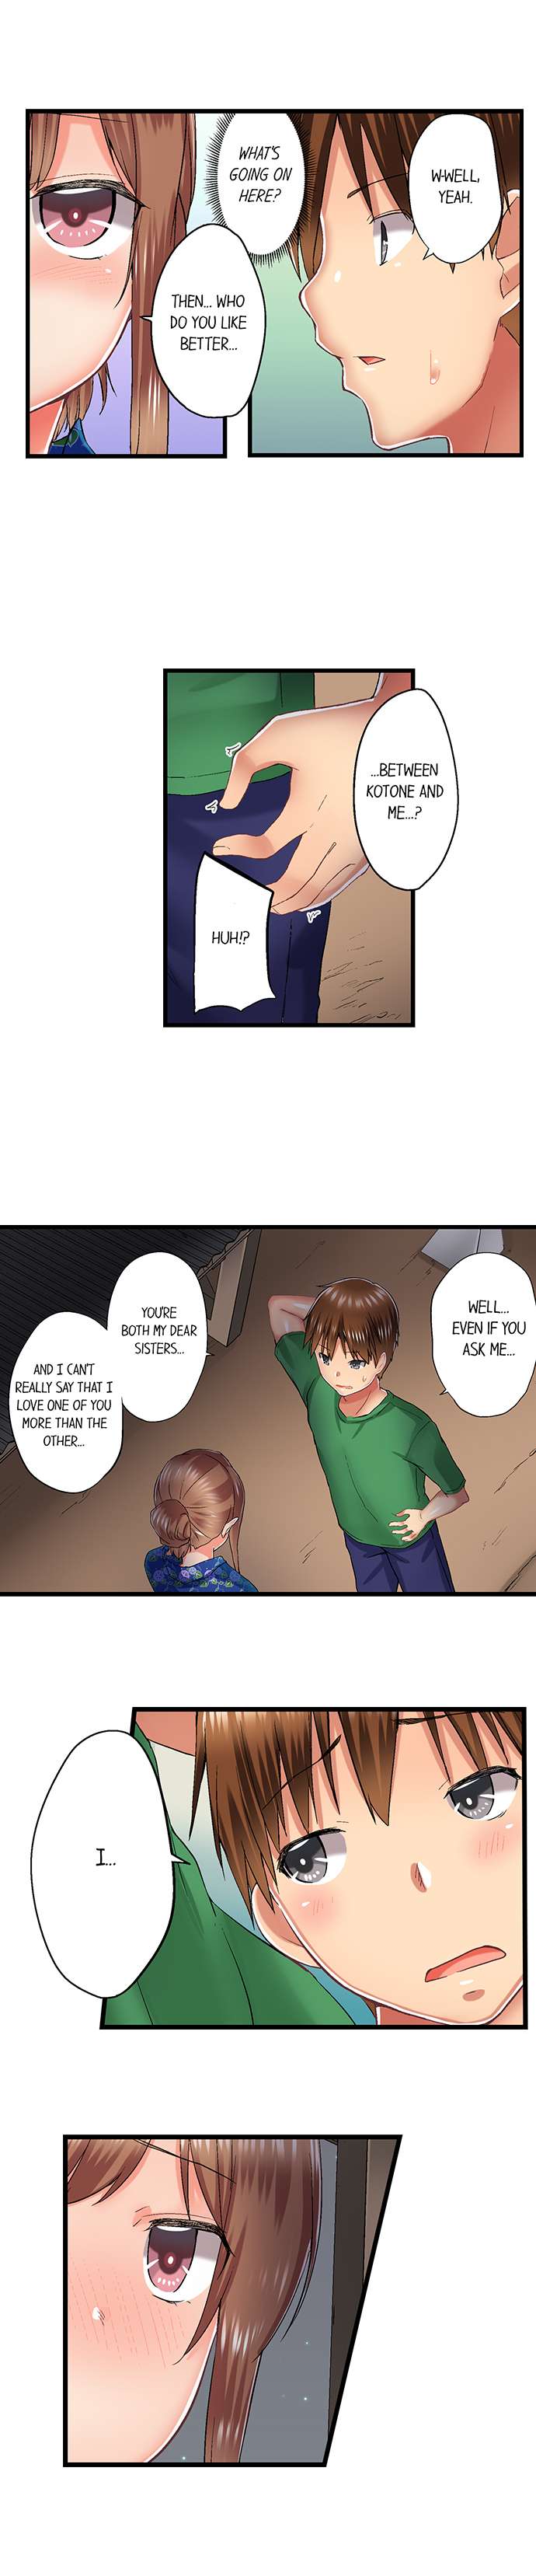 My Brother’s Slipped Inside Me in The Bathtub - Chapter 68 Page 4